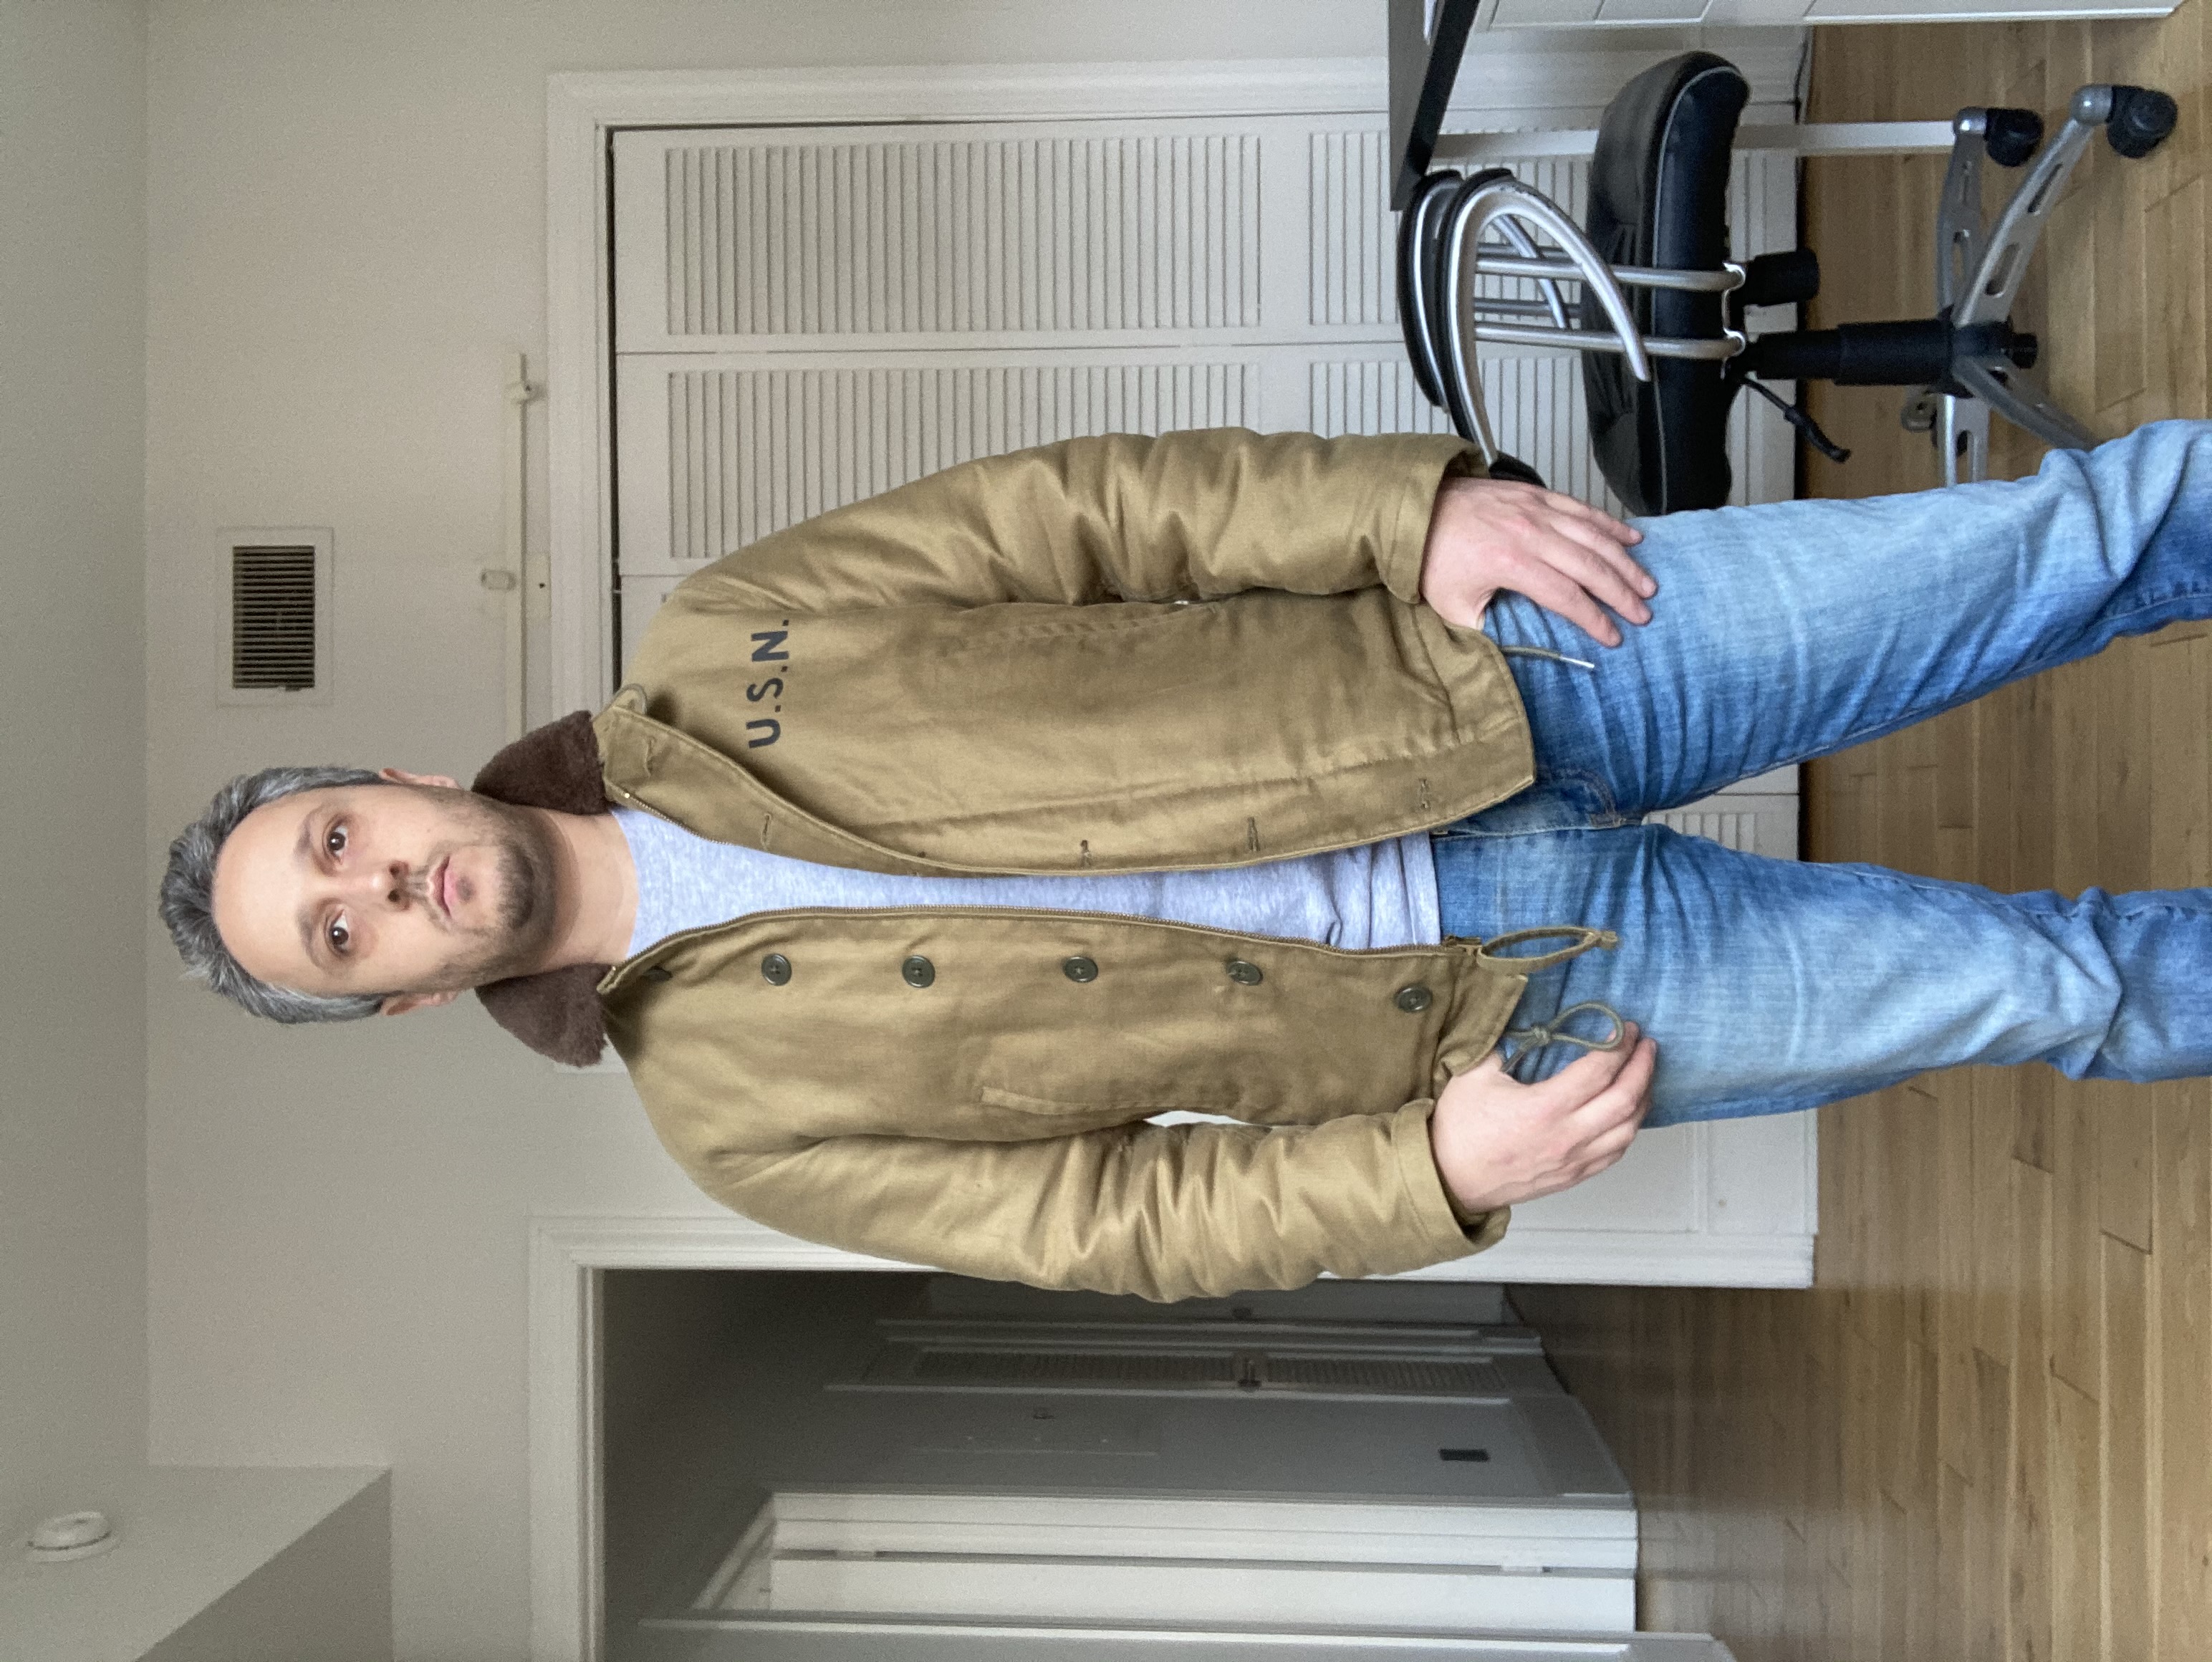 Let's talk about Deck Jackets (my grail has landed) | The Fedora Lounge